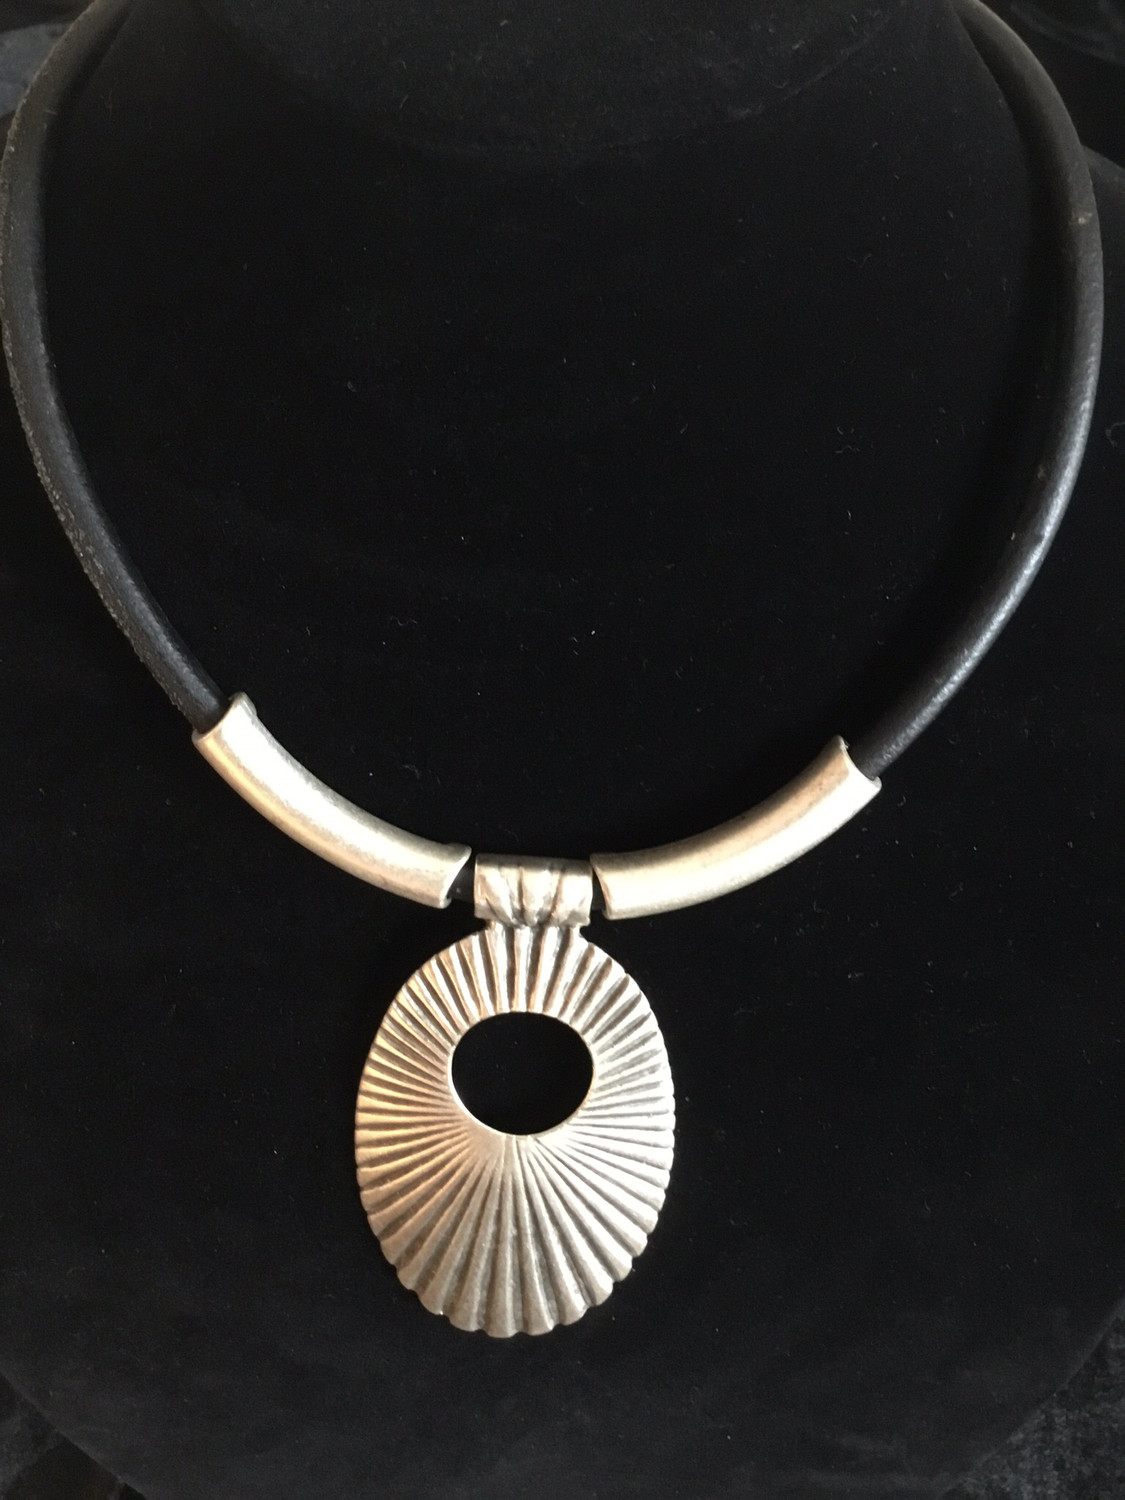 Pewter And Black Leather Short Necklace With Oval Designer Pendant 